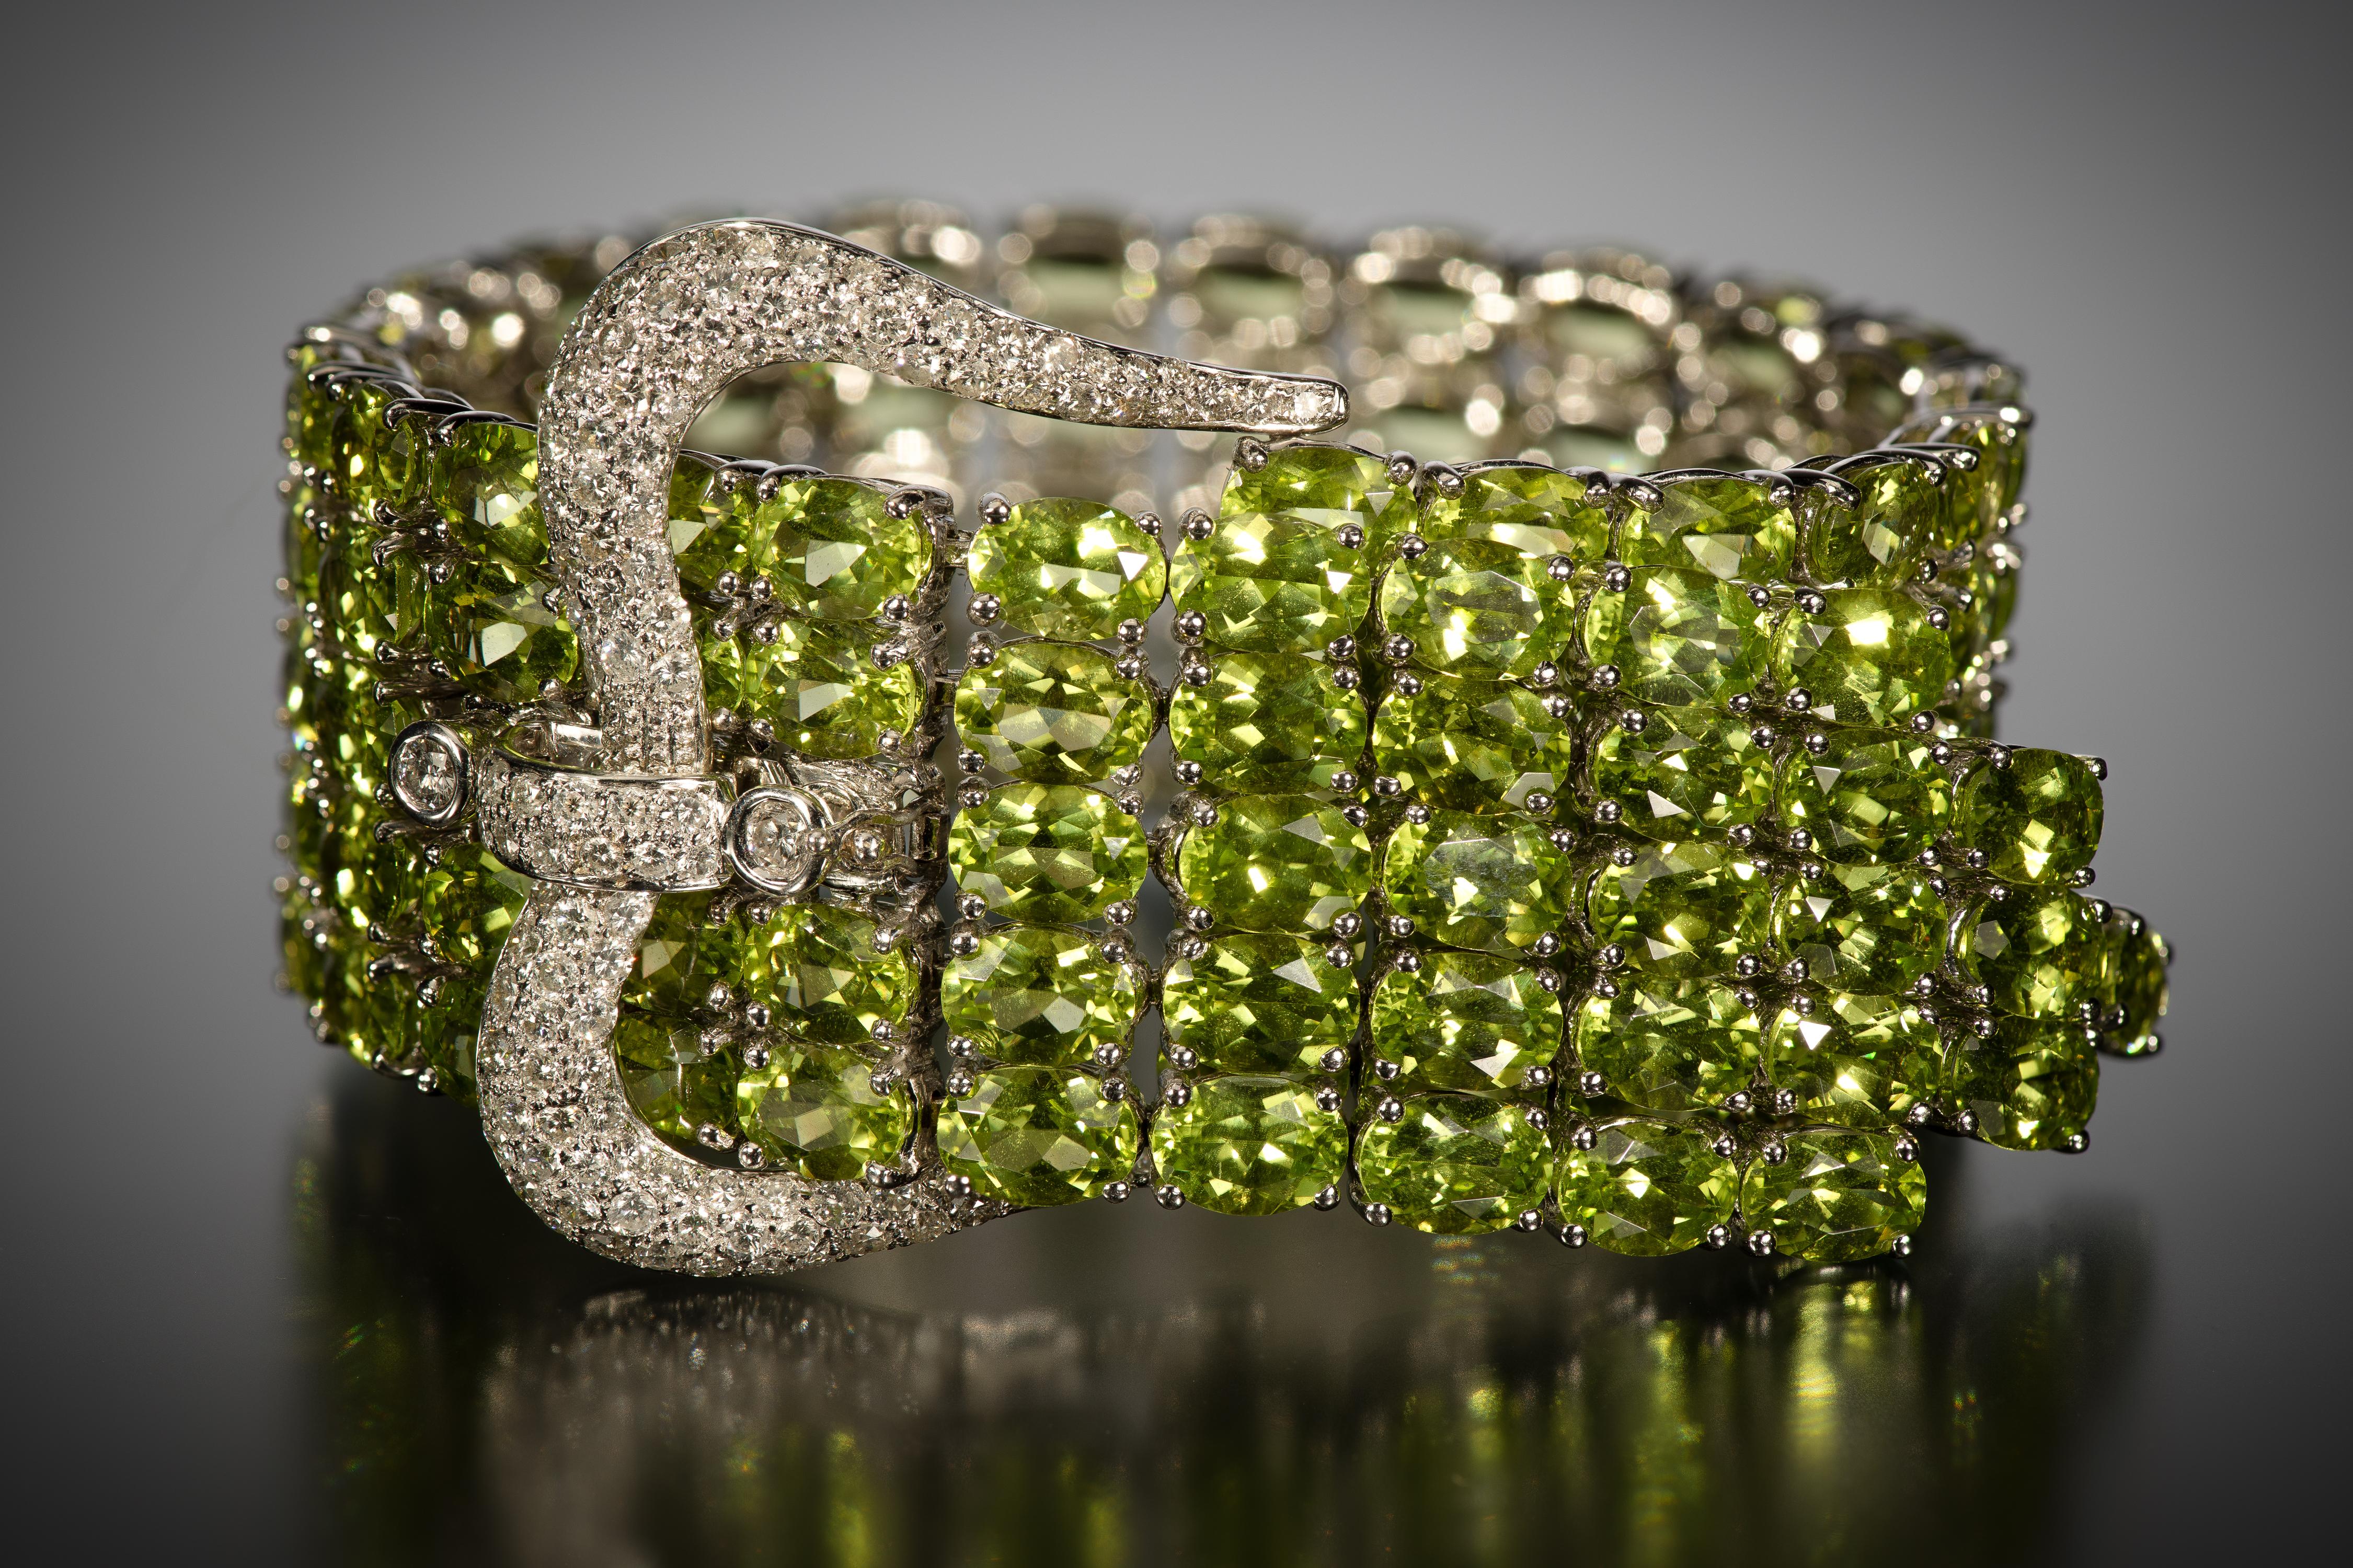 A wide strap of bright green peridots wraps around the wrist, ending in a flourish of peridot fringe. The bracelet is secured by a crown-shaped buckle set with over 2 carats of bright white diamonds. The peridots are the most desirable shade of